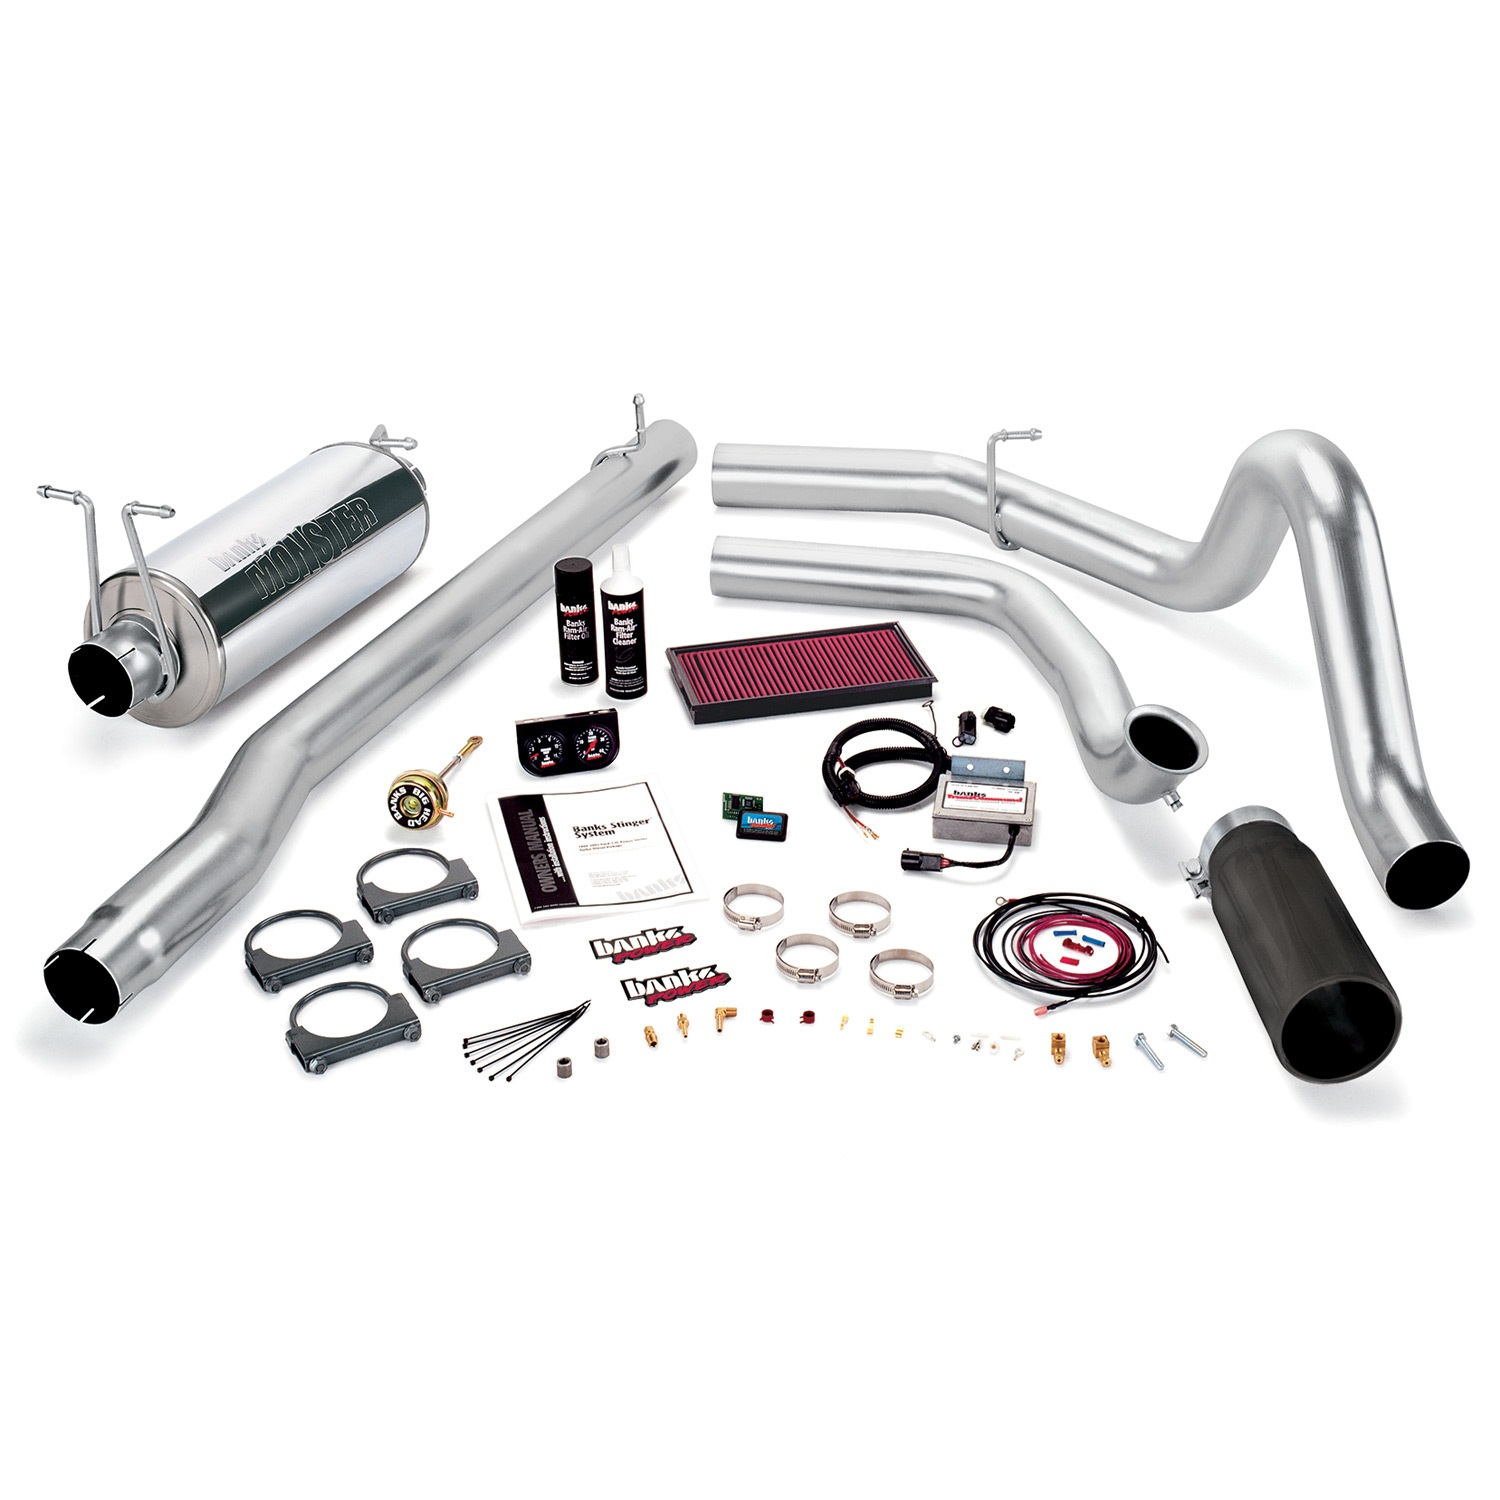 Banks Power 47453-B Single Exhaust Stinger Sys for 99.5-03 Ford - Click Image to Close